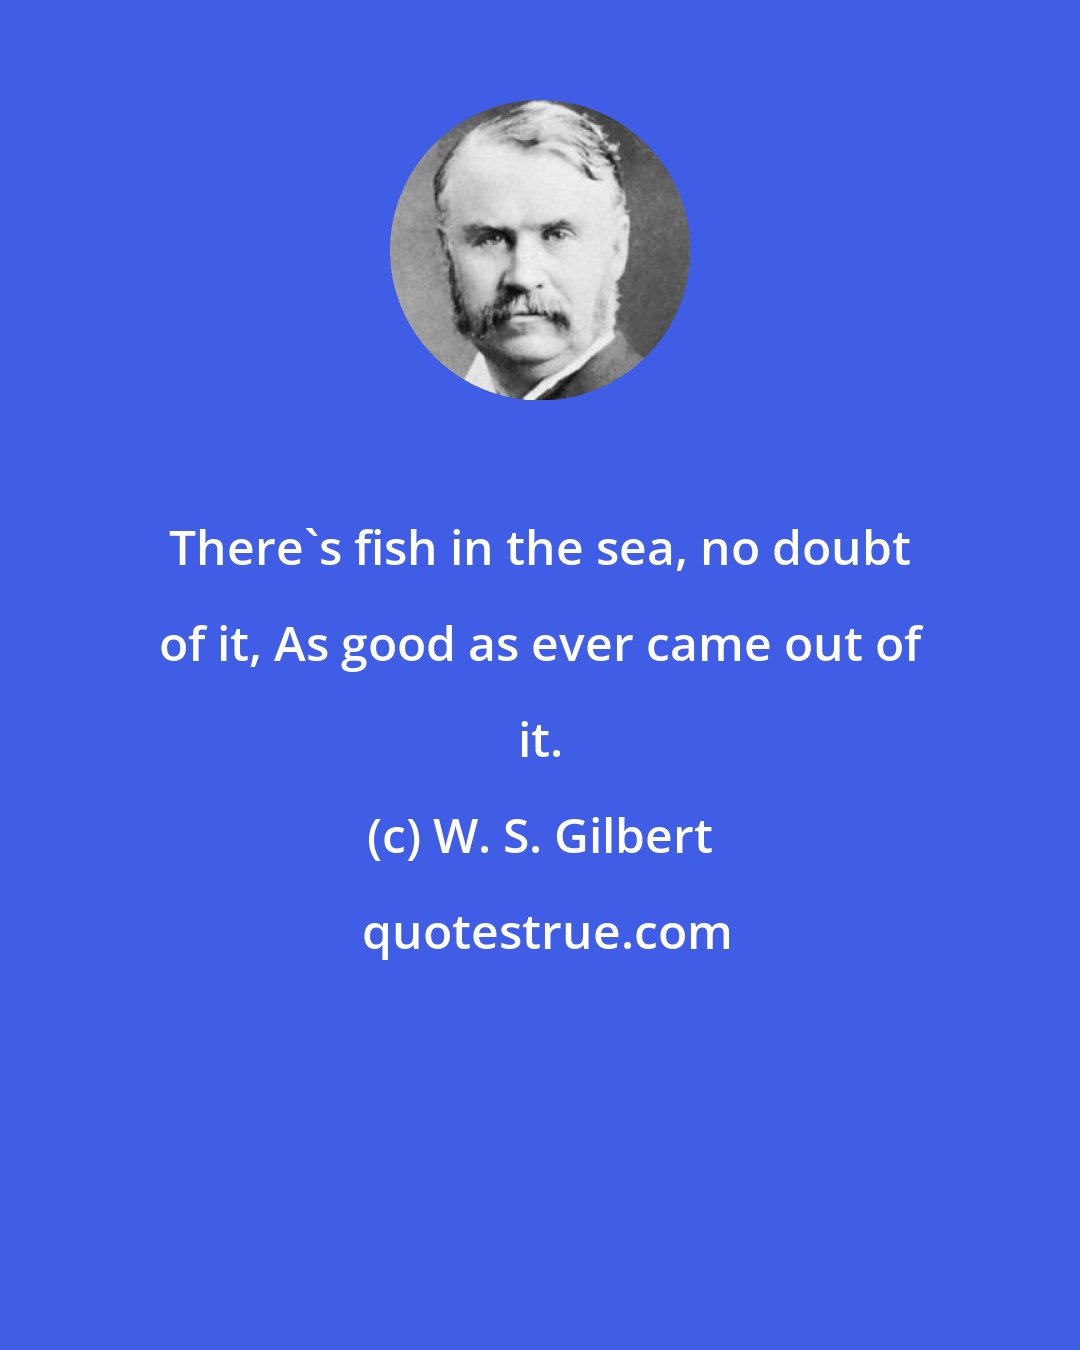 W. S. Gilbert: There's fish in the sea, no doubt of it, As good as ever came out of it.